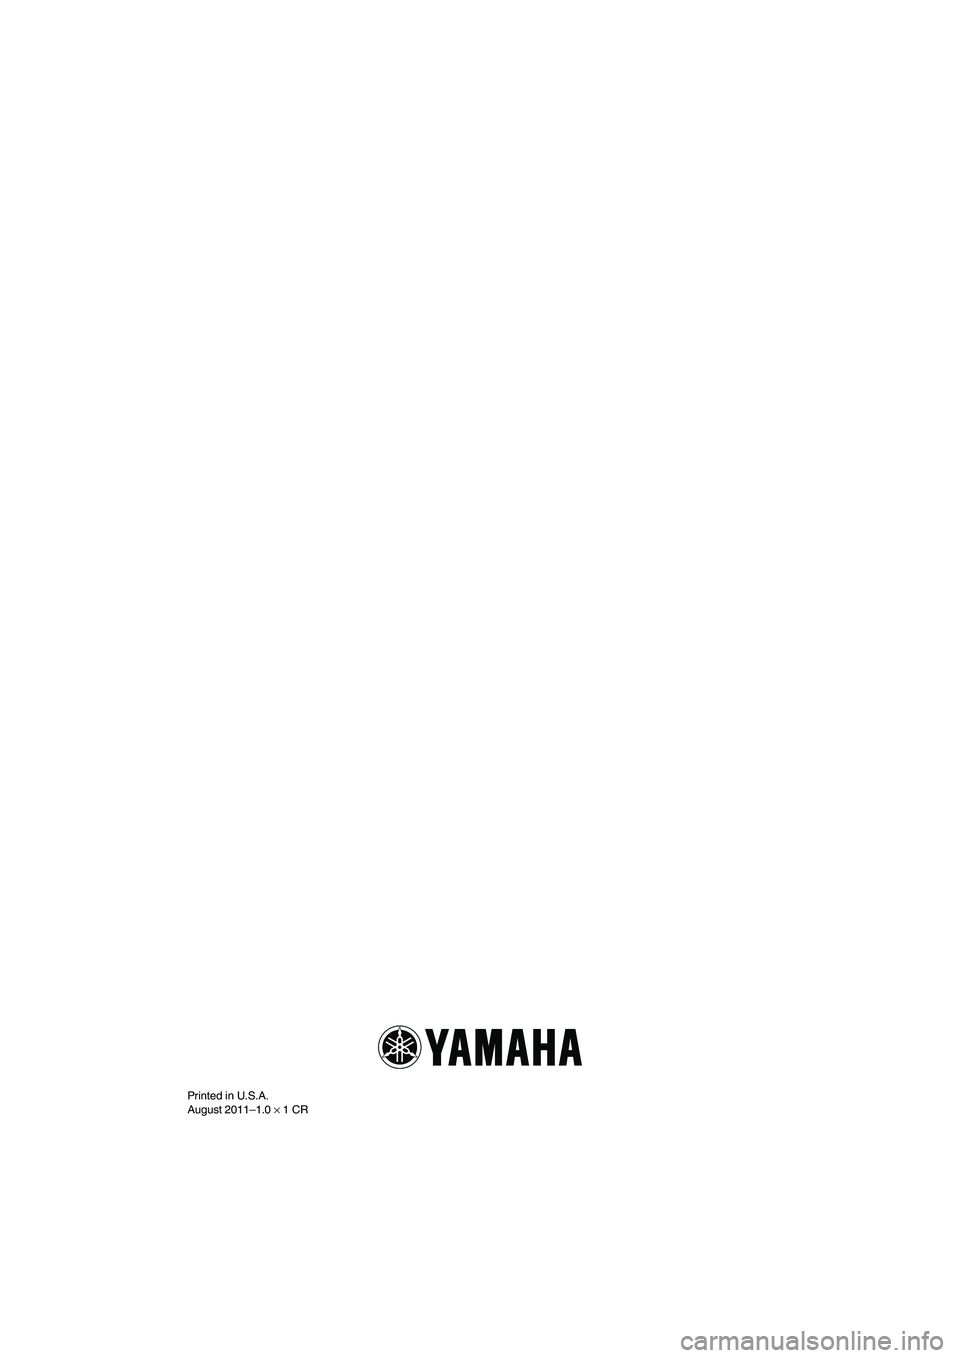 YAMAHA VXS 2012  Owners Manual Printed in U.S.A.
August 2011–1.0 × 1 CR
UF2M71E0.book  Page 1  Wednesday, June 29, 2011  9:27 AM 